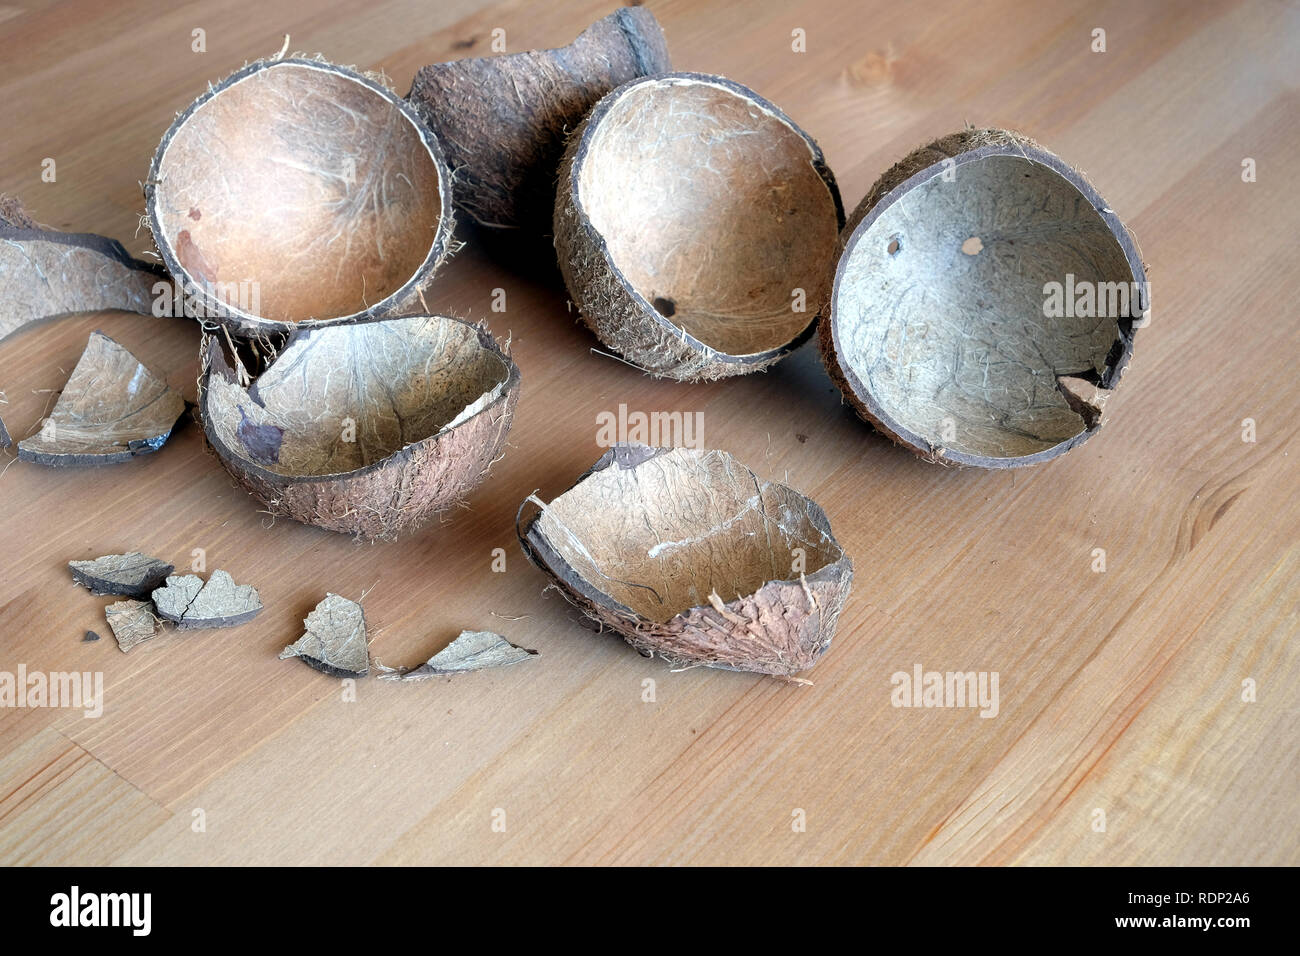 Still life with broken coconut shell ripe white flesh inside and debris on brown wooden table as background. Horizontal close up photo Stock Photo